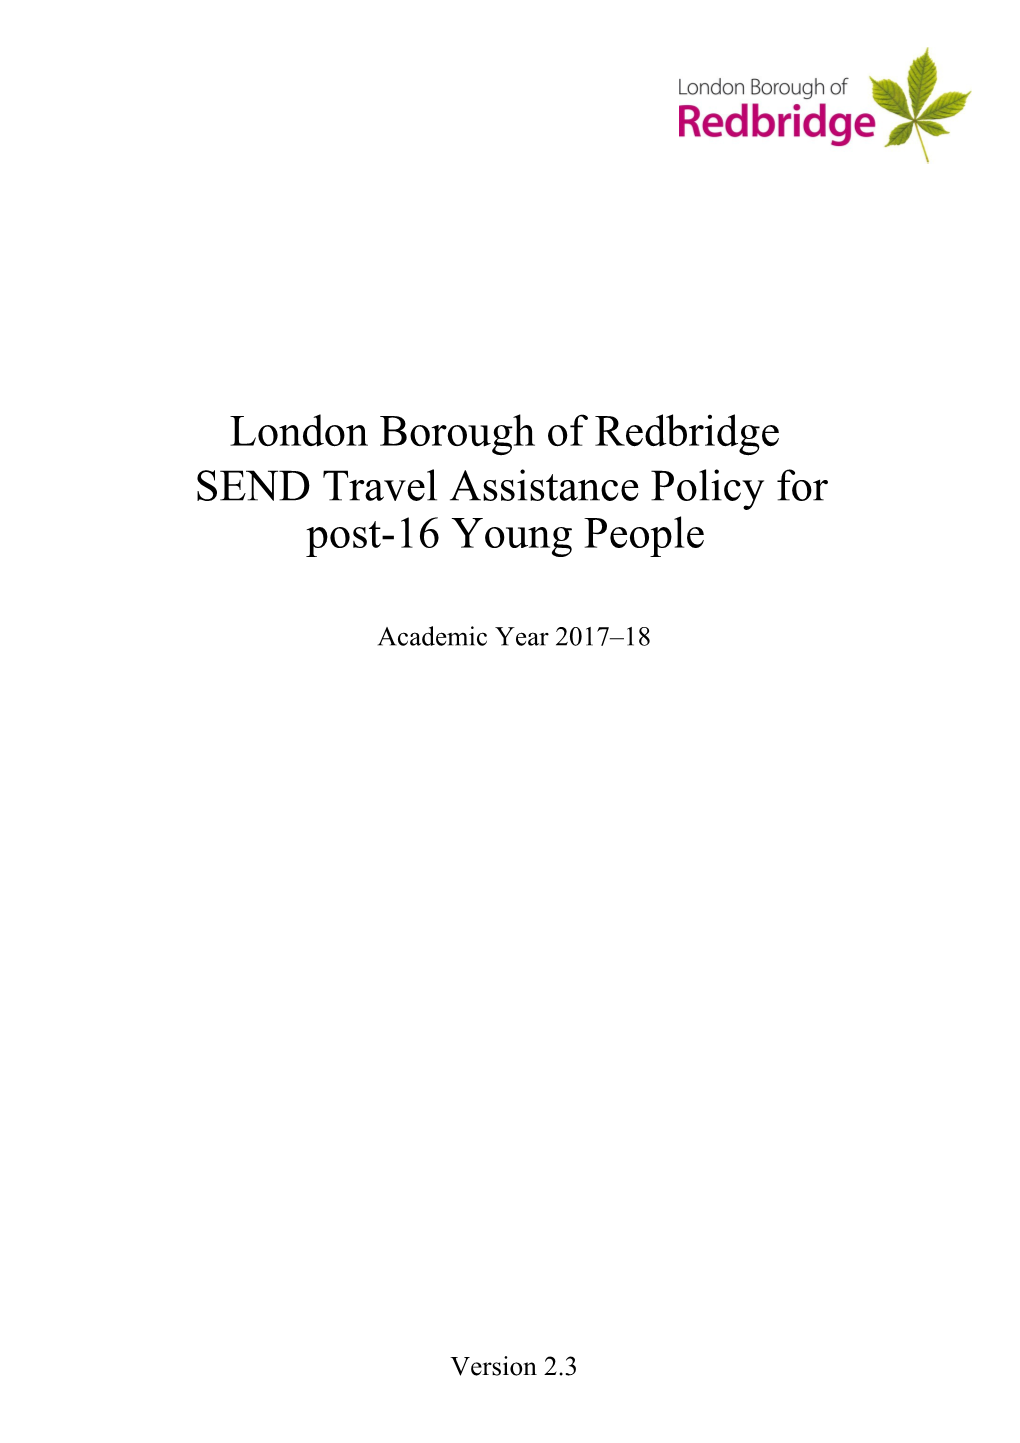 FINAL Home to School Transport Policy for London Borough of Redbridge 2011